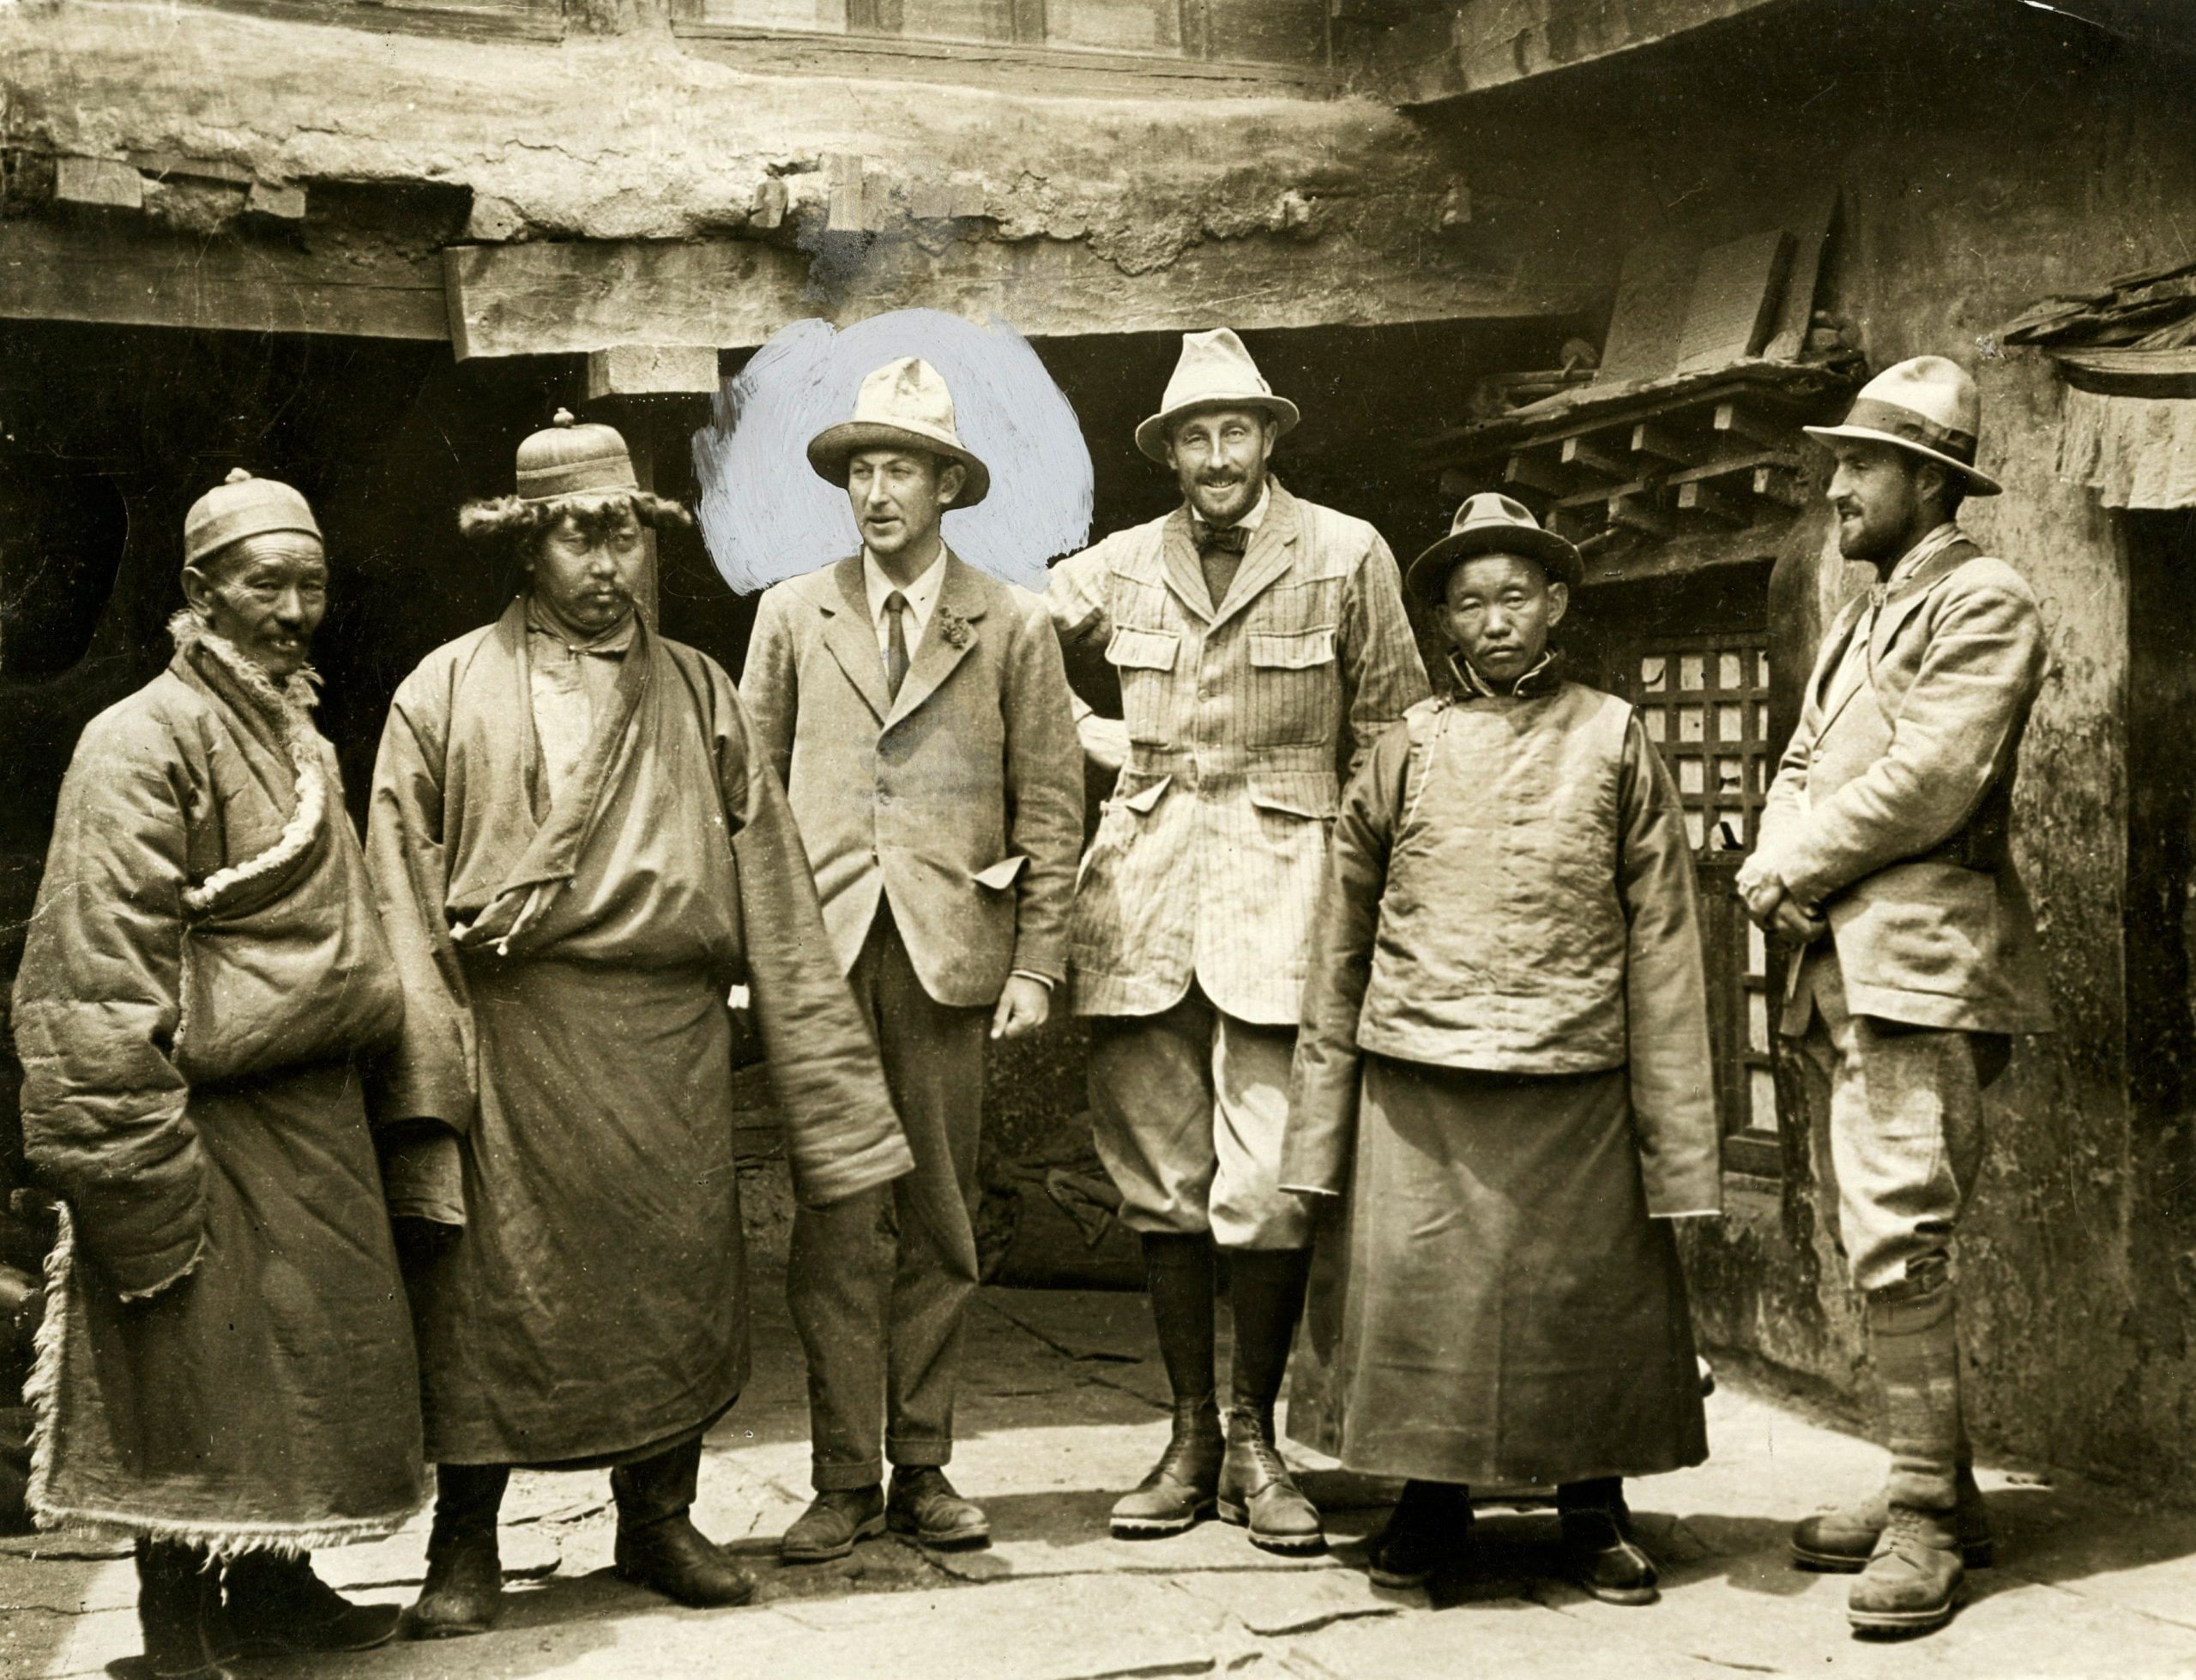 George Mallory (center, with a circle around his head) and other members of the British expedition that in 1924 aimed to be the first to reach the summit of Mount Everest. Mallory lost his life during the expedition | Source: Wikimedia Commons